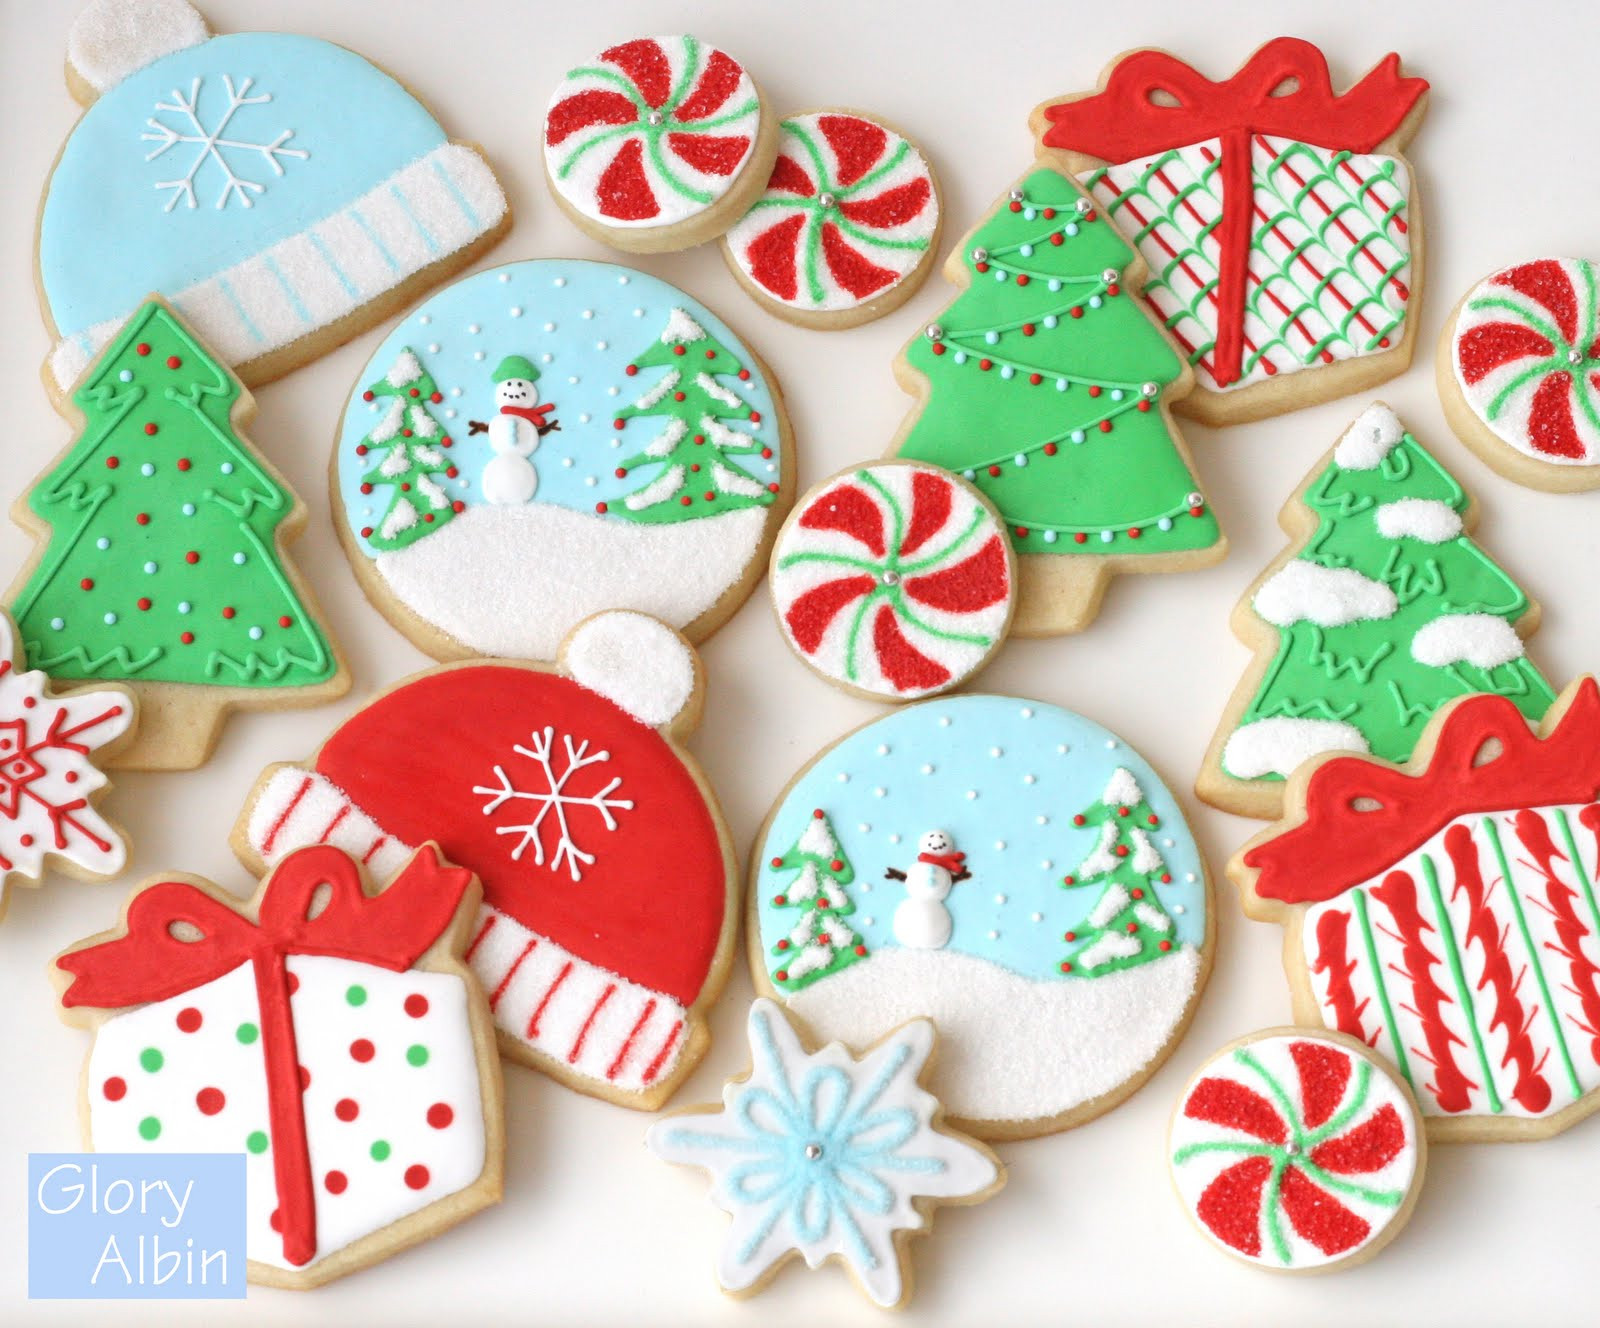 Royal Icing Christmas Cookie
 Decorating Sugar Cookies with Royal Icing – Glorious Treats